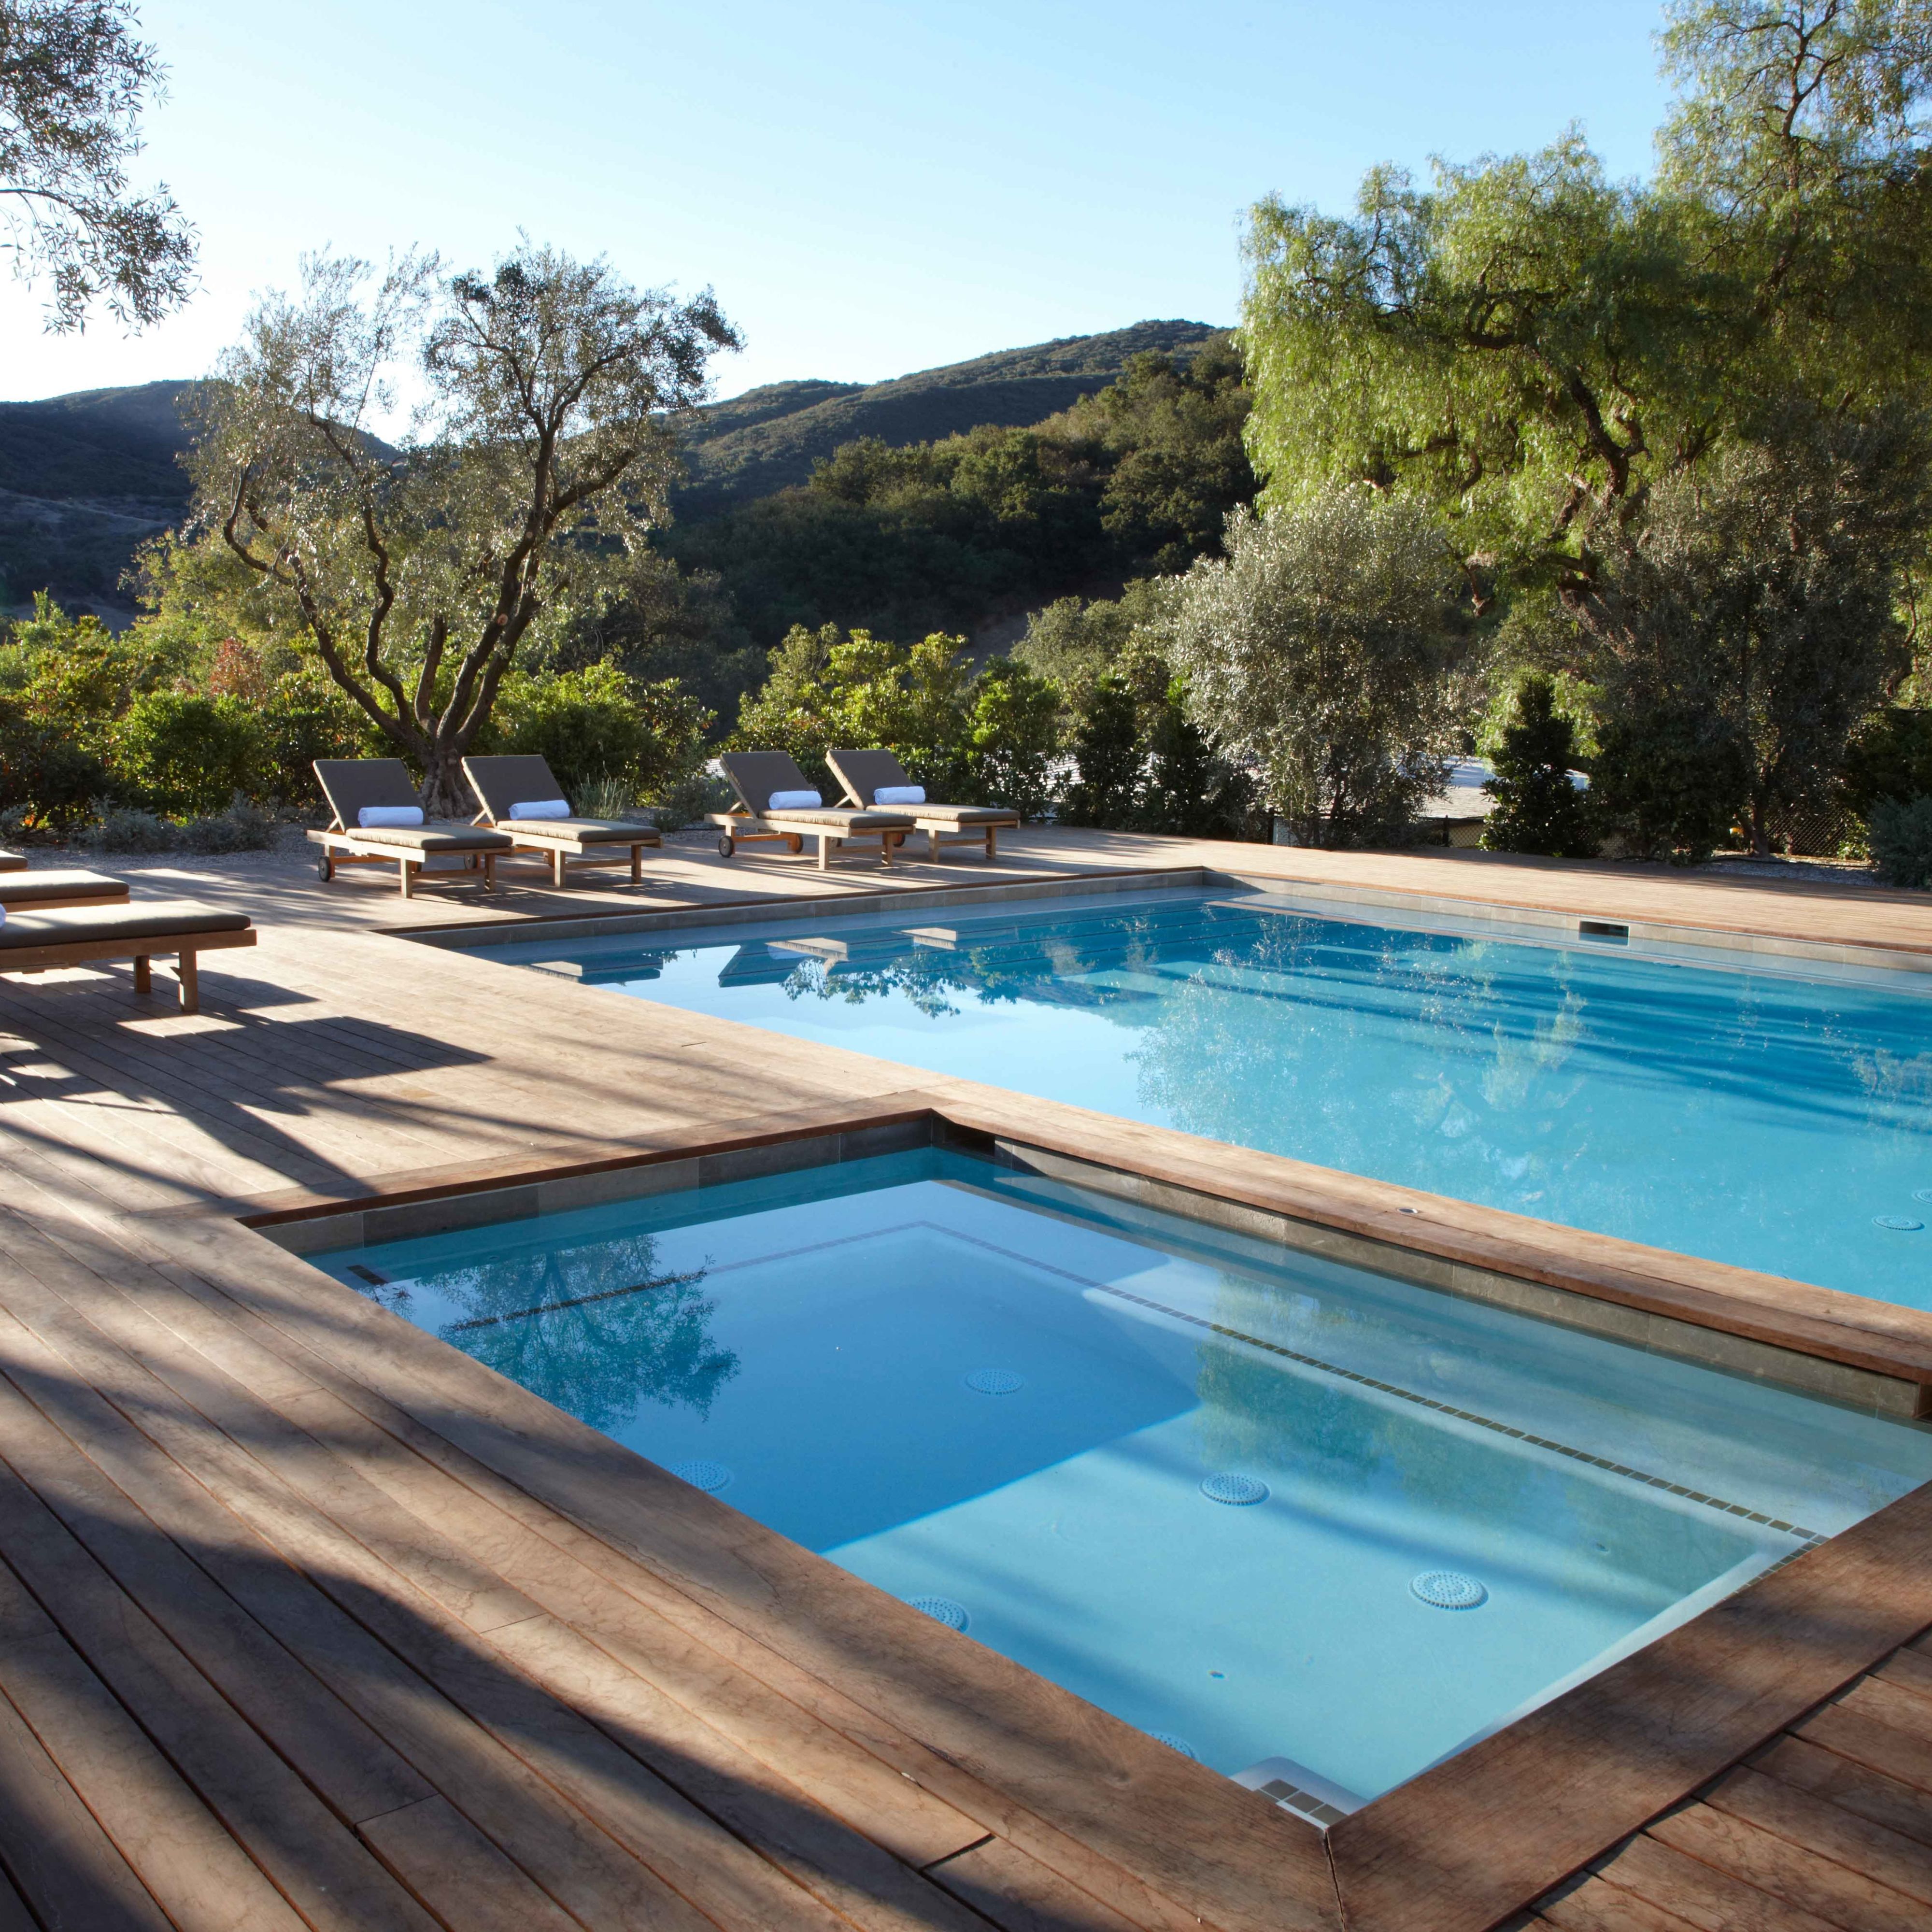 Swimming pool, Property, Natural landscape, Real estate, Tree, Vacation, Leisure, Estate, Home, House, 